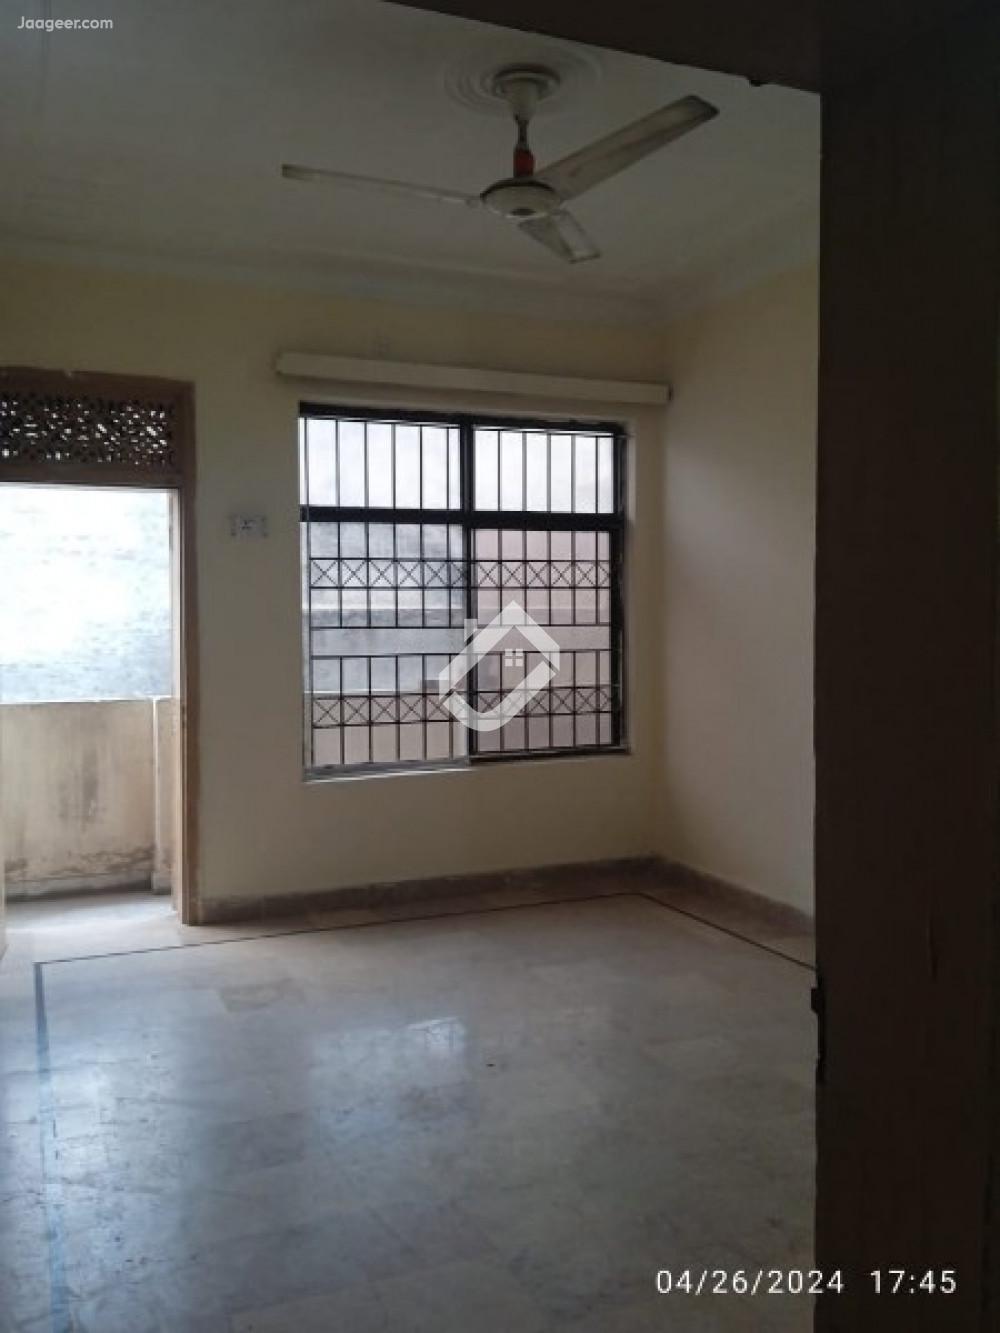 Main image 10 Marla Upper Portion For Rent In Airport Housing Society Wakeel Colony near Airport Housing Society Rawalpindi 